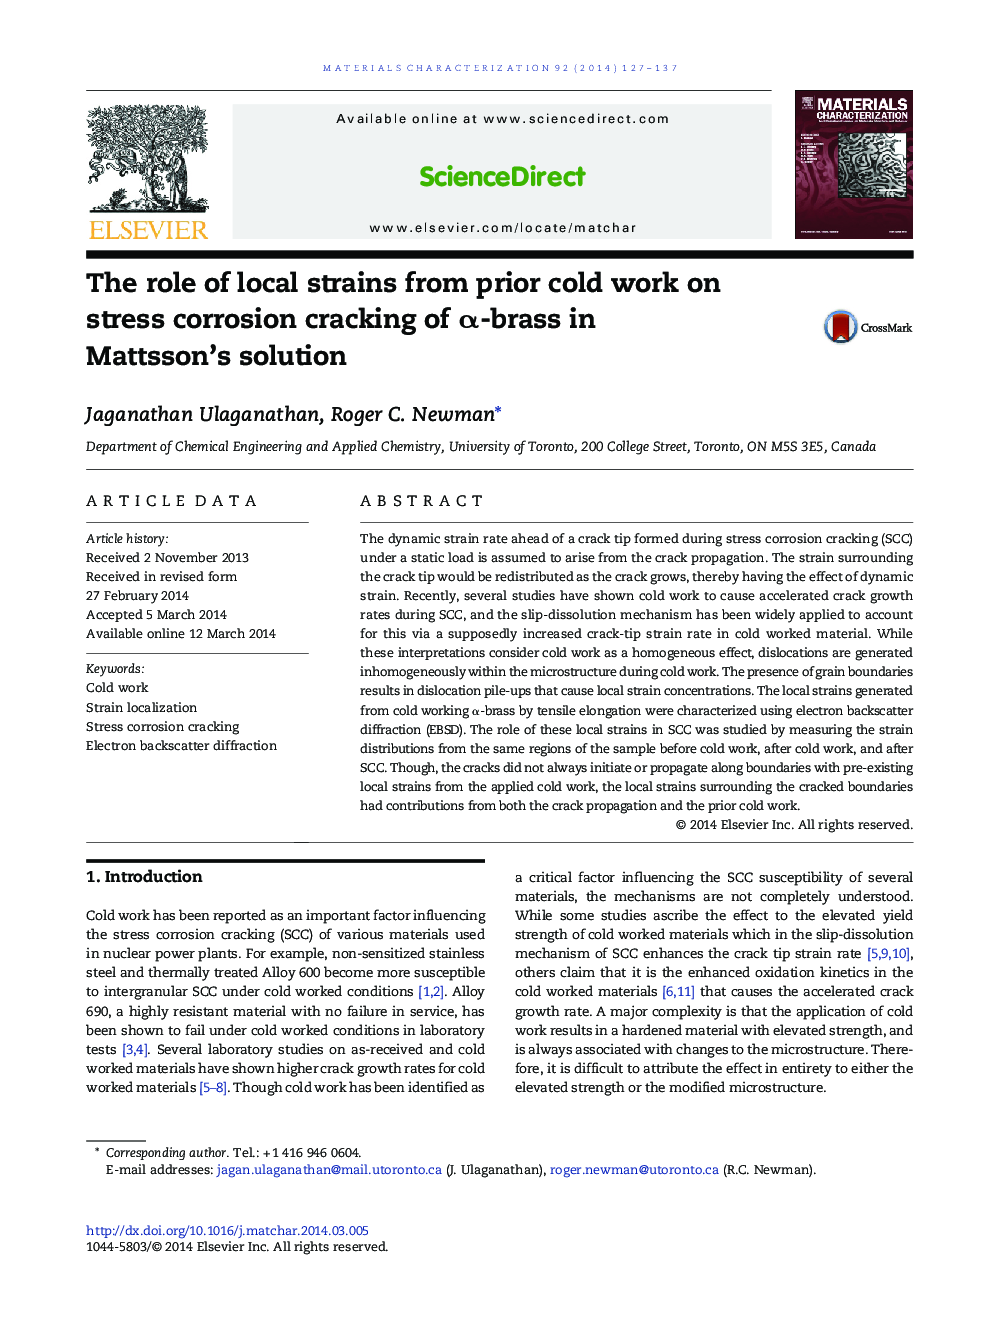 The role of local strains from prior cold work on stress corrosion cracking of α-brass in Mattsson's solution